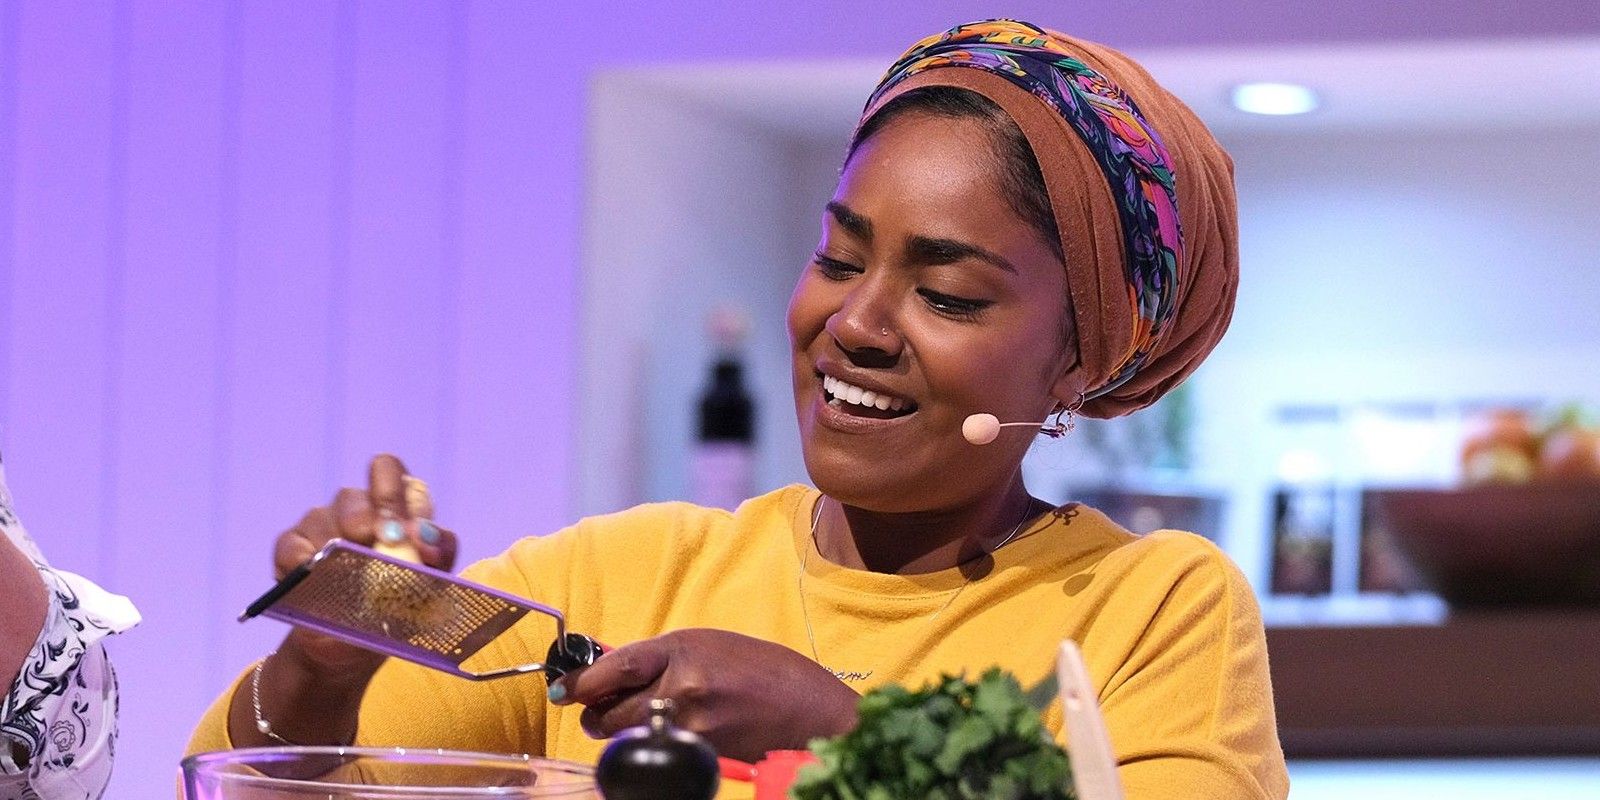 Nadiya Hussain in a yellow top and beige headgear cooking